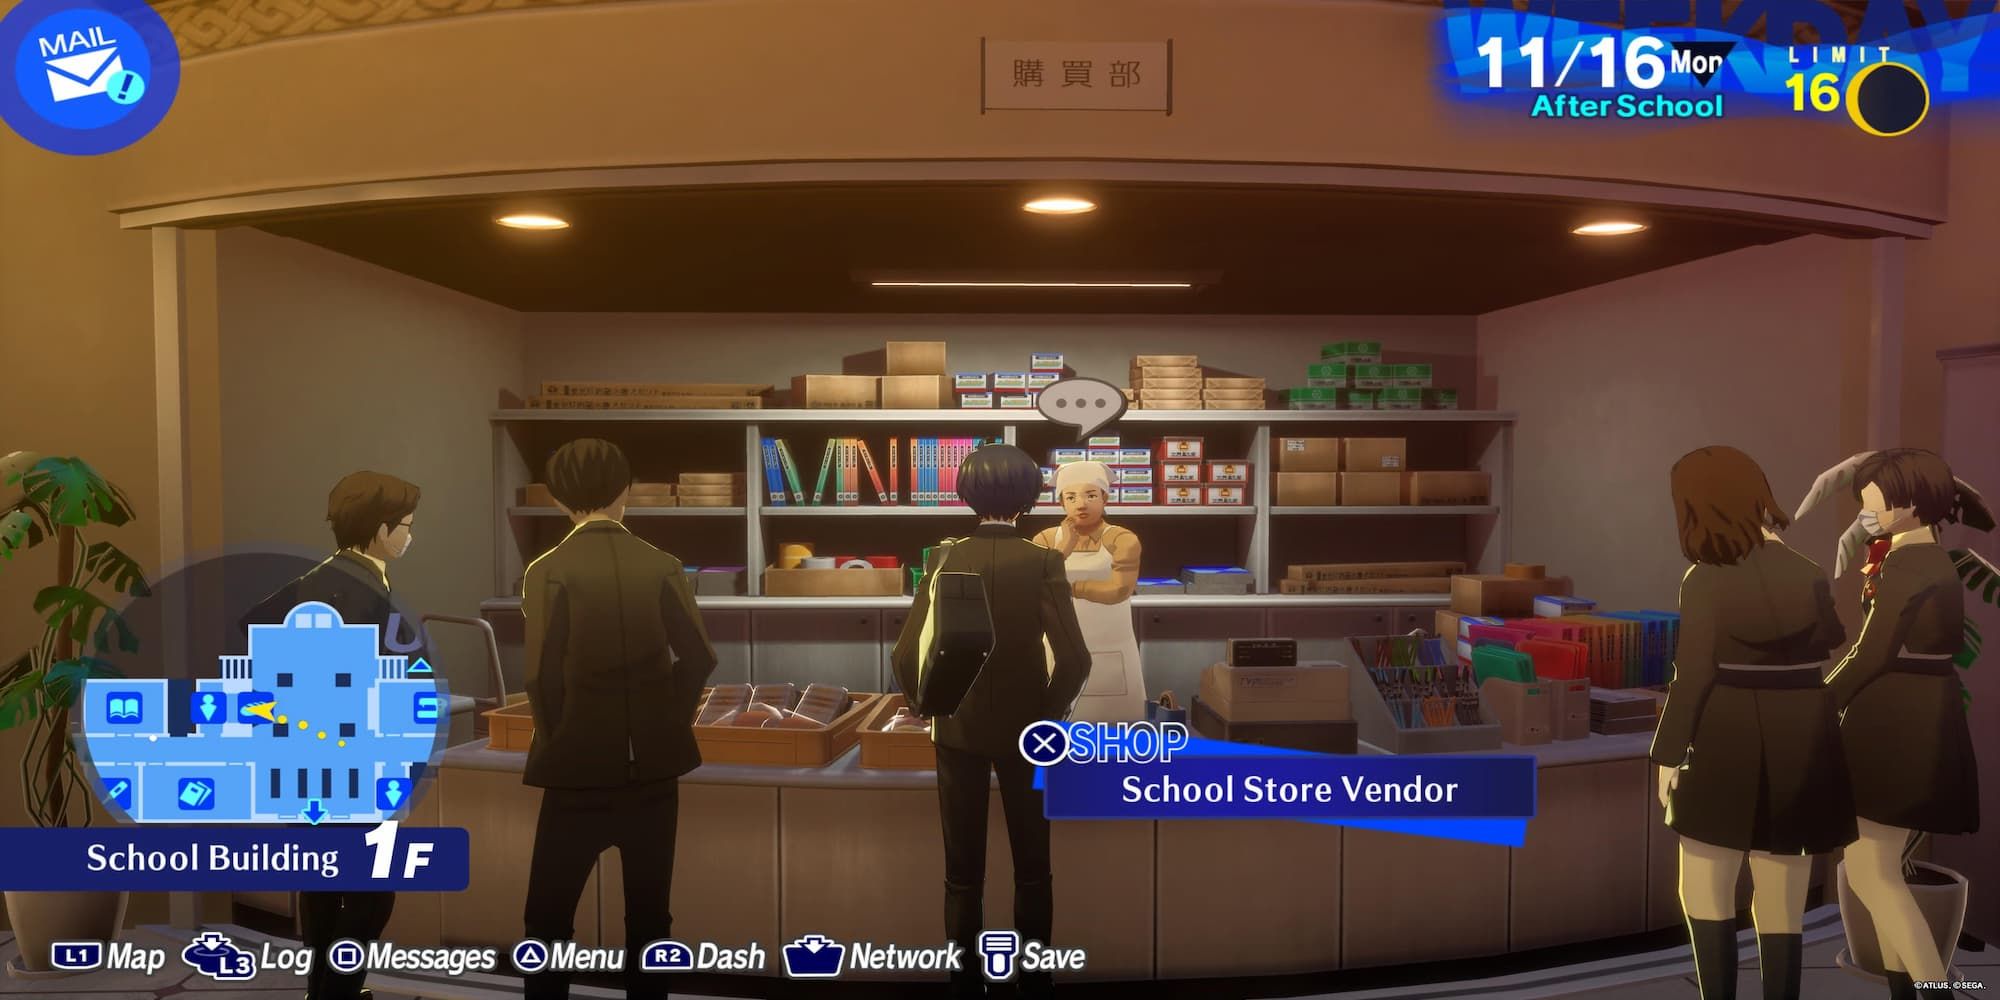 The Player Interacting With The School Store Vendor 